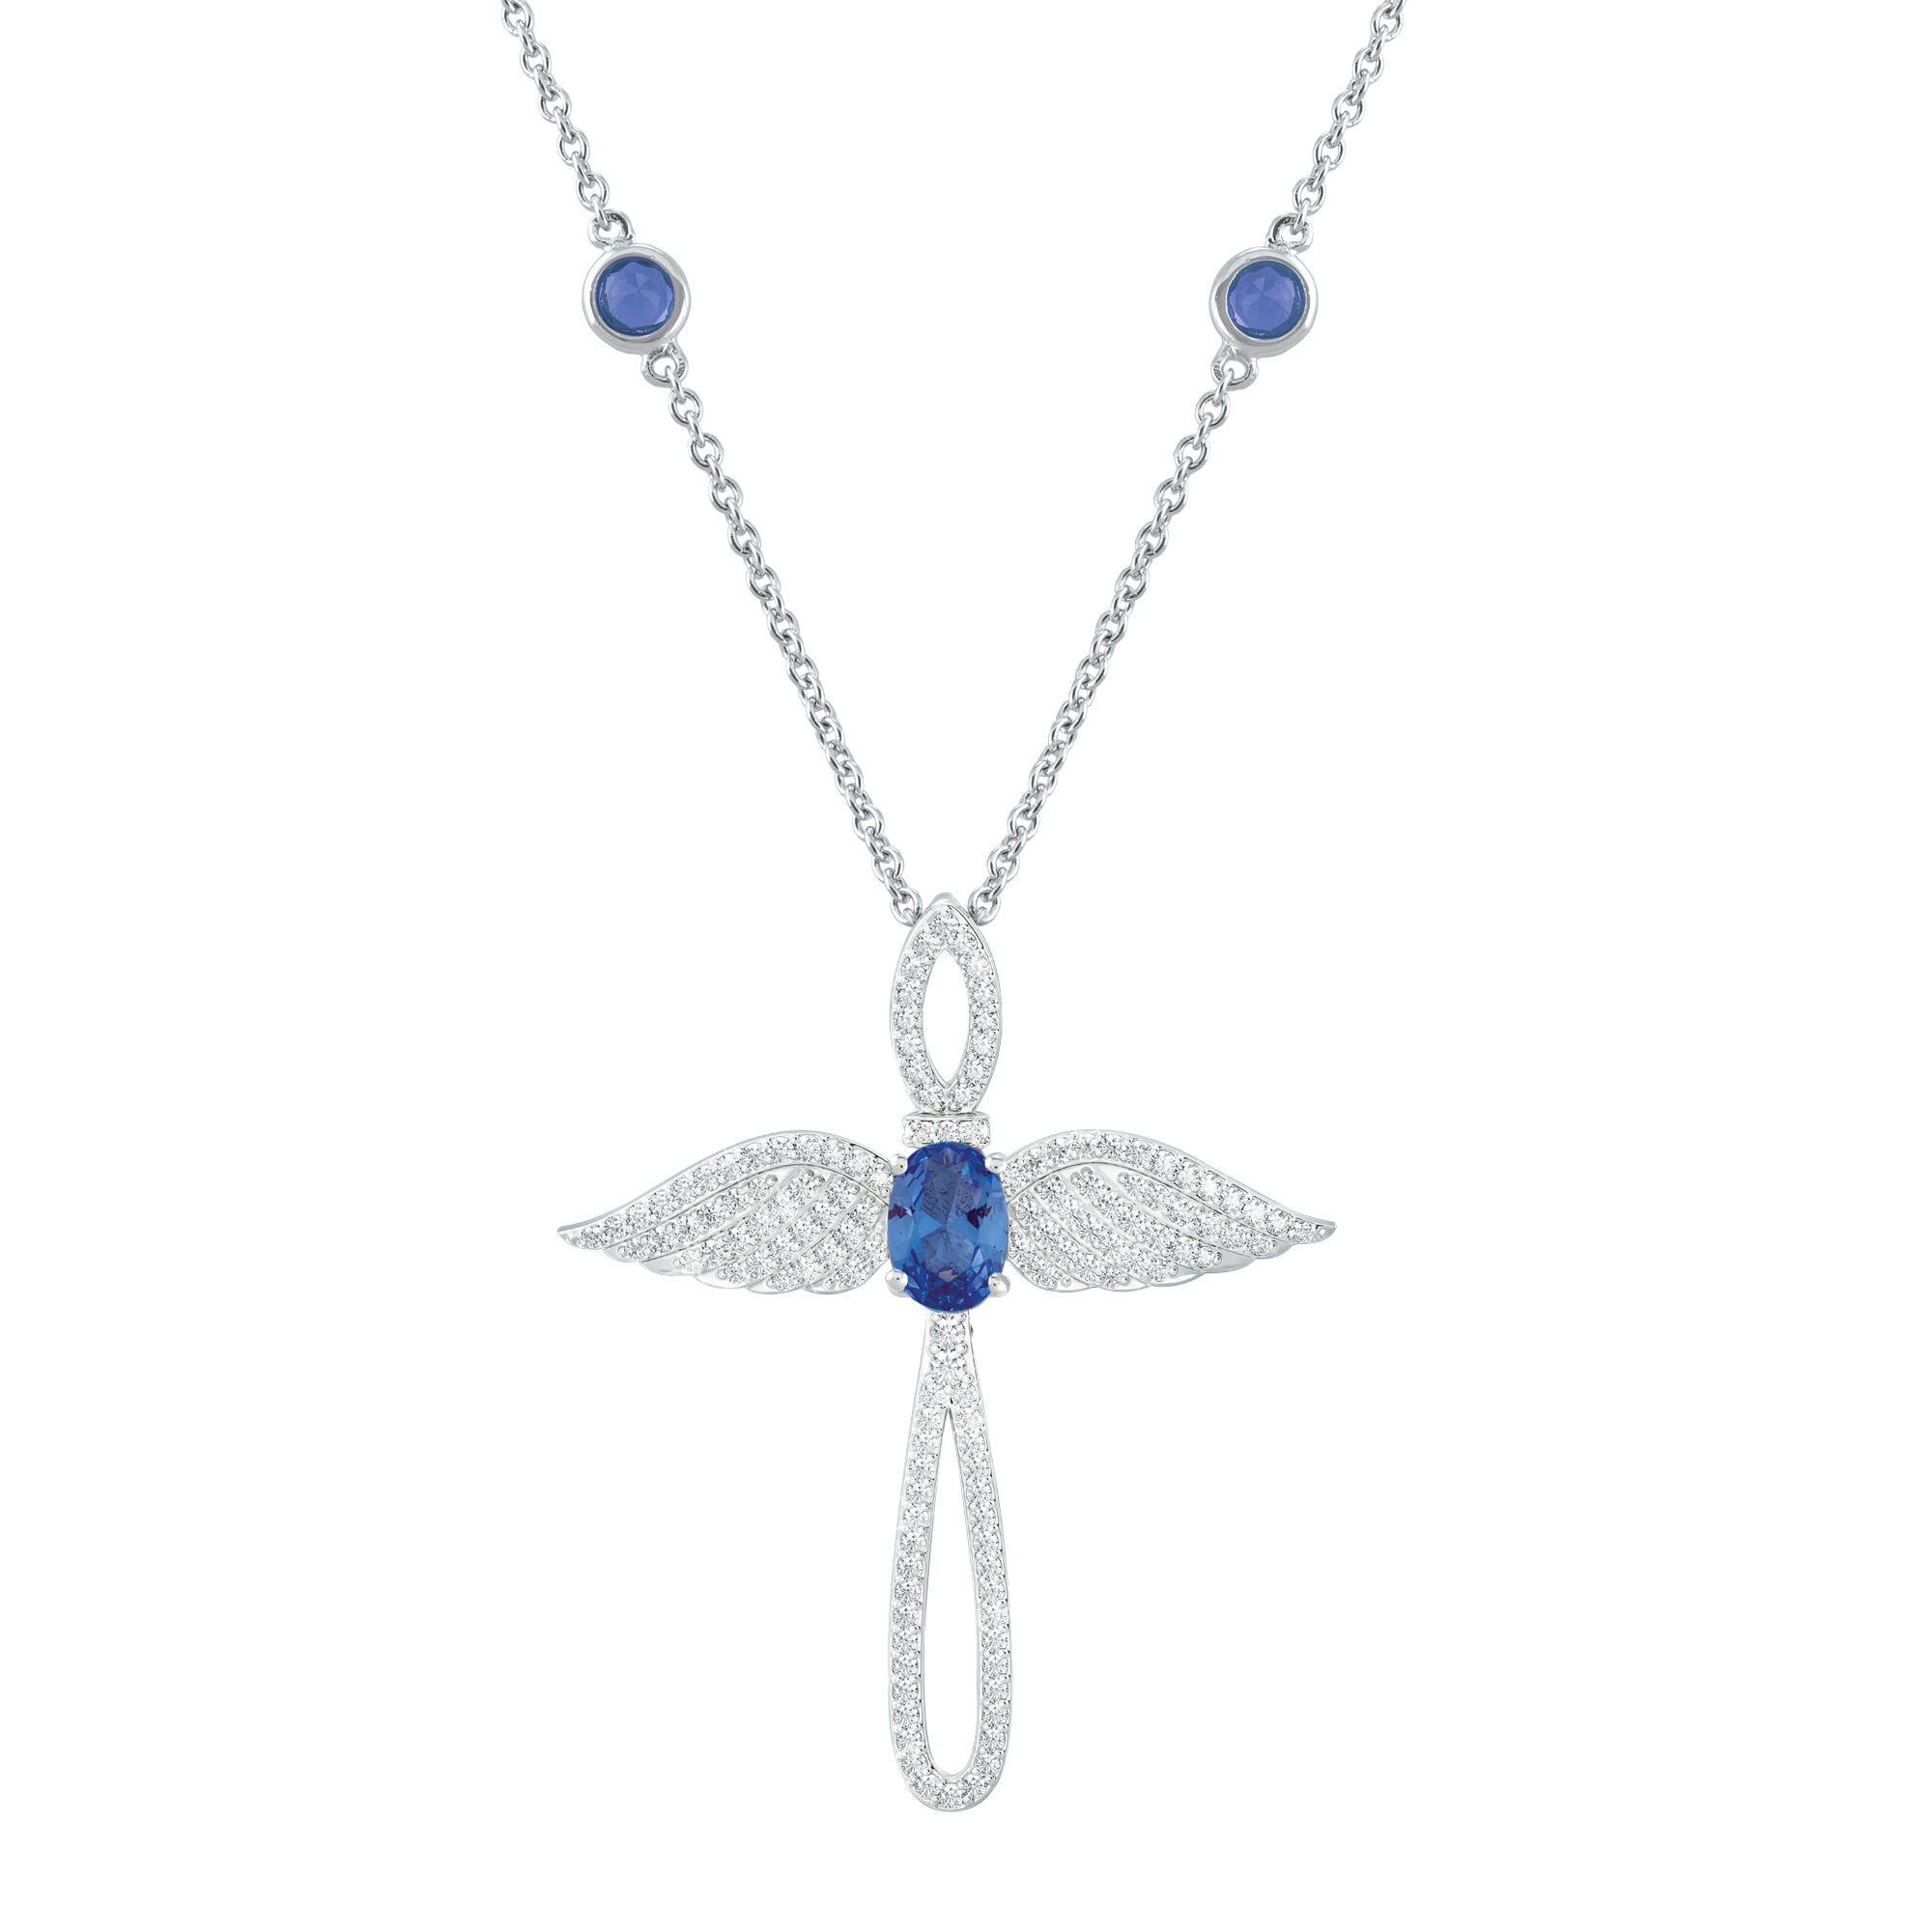 Touched by an Angel Birthstone Necklace 6842 0017 i september